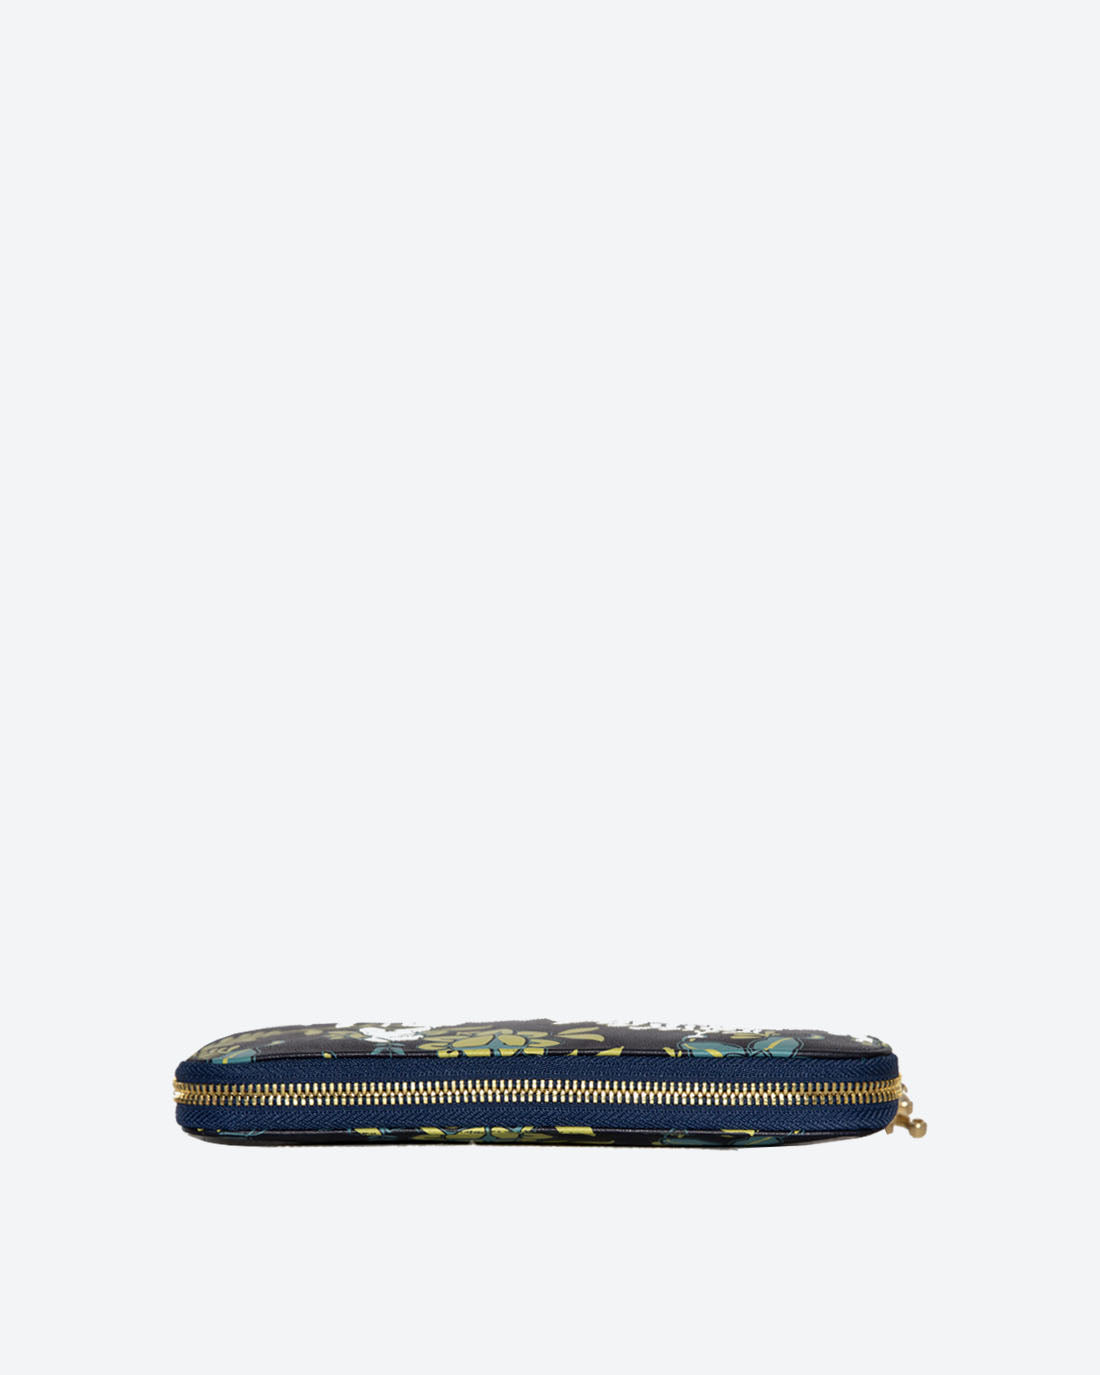 ATROPA Printed Leather Wallet